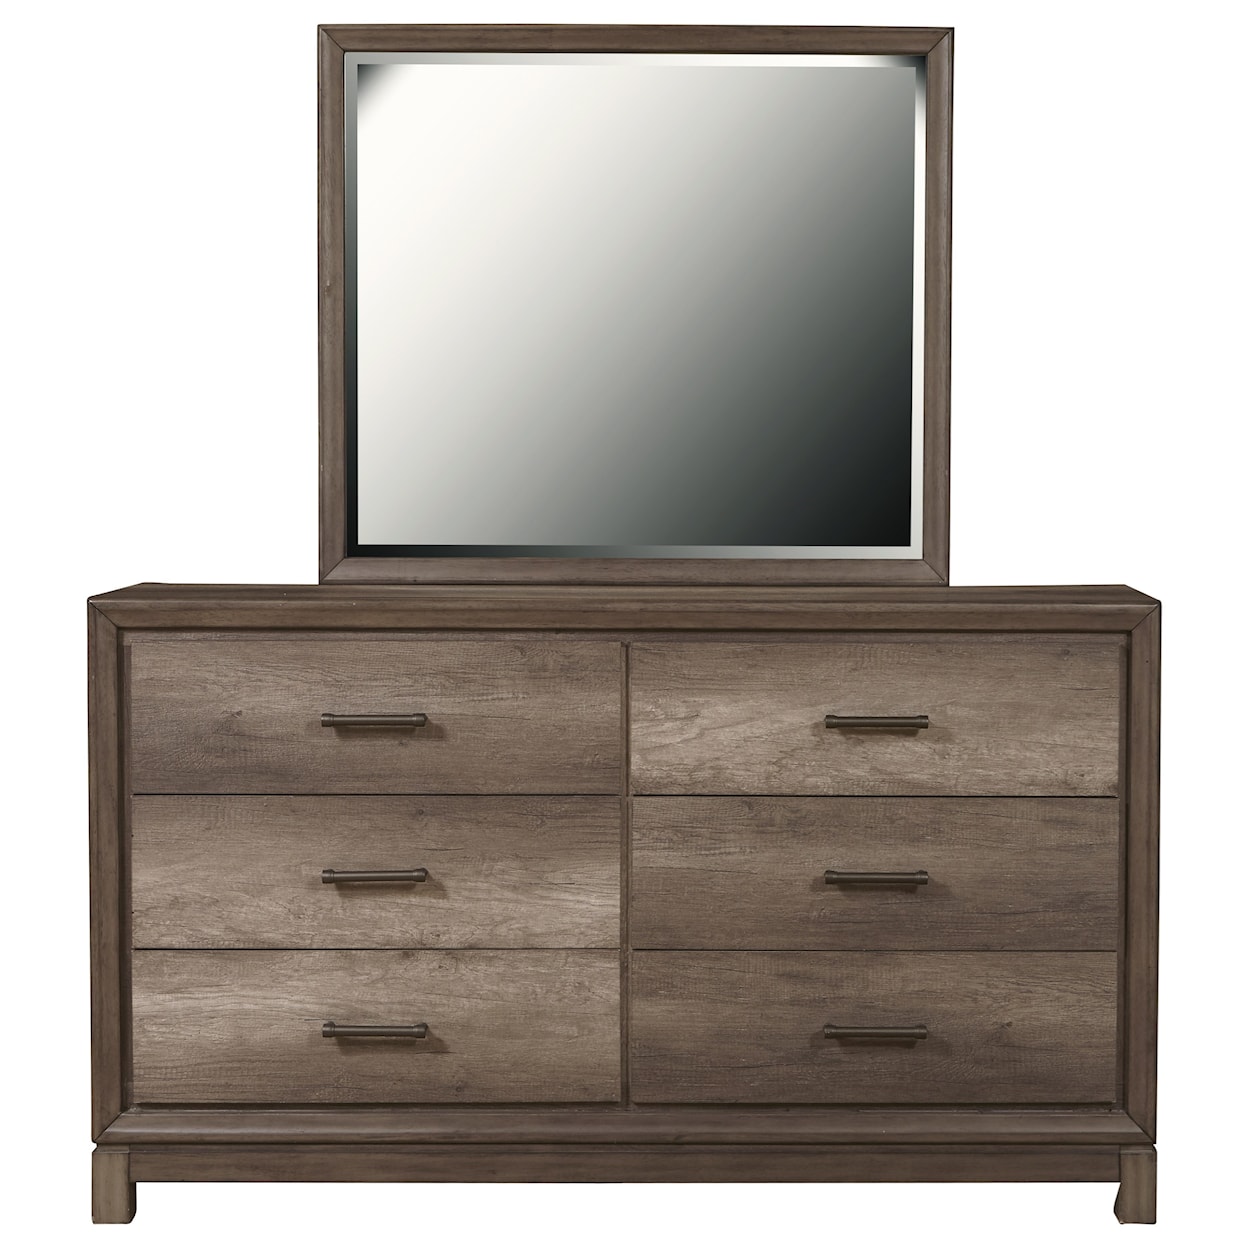 Samuel Lawrence Hanover Square Dresser and Mirror Combination